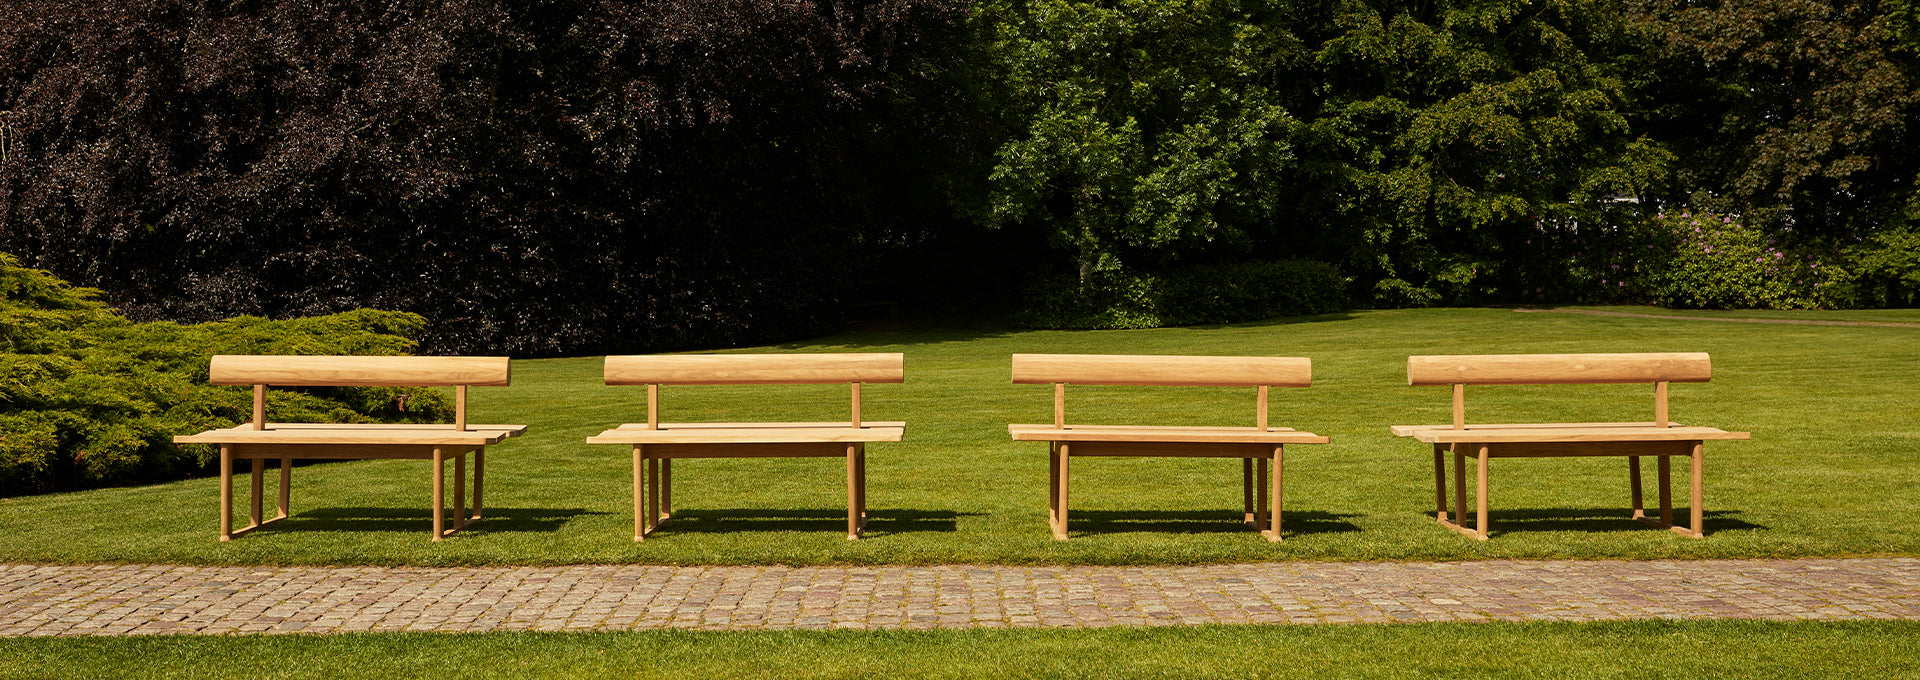  Fritz Hansen Banco bench by Hugo Passos used for public seating in a park